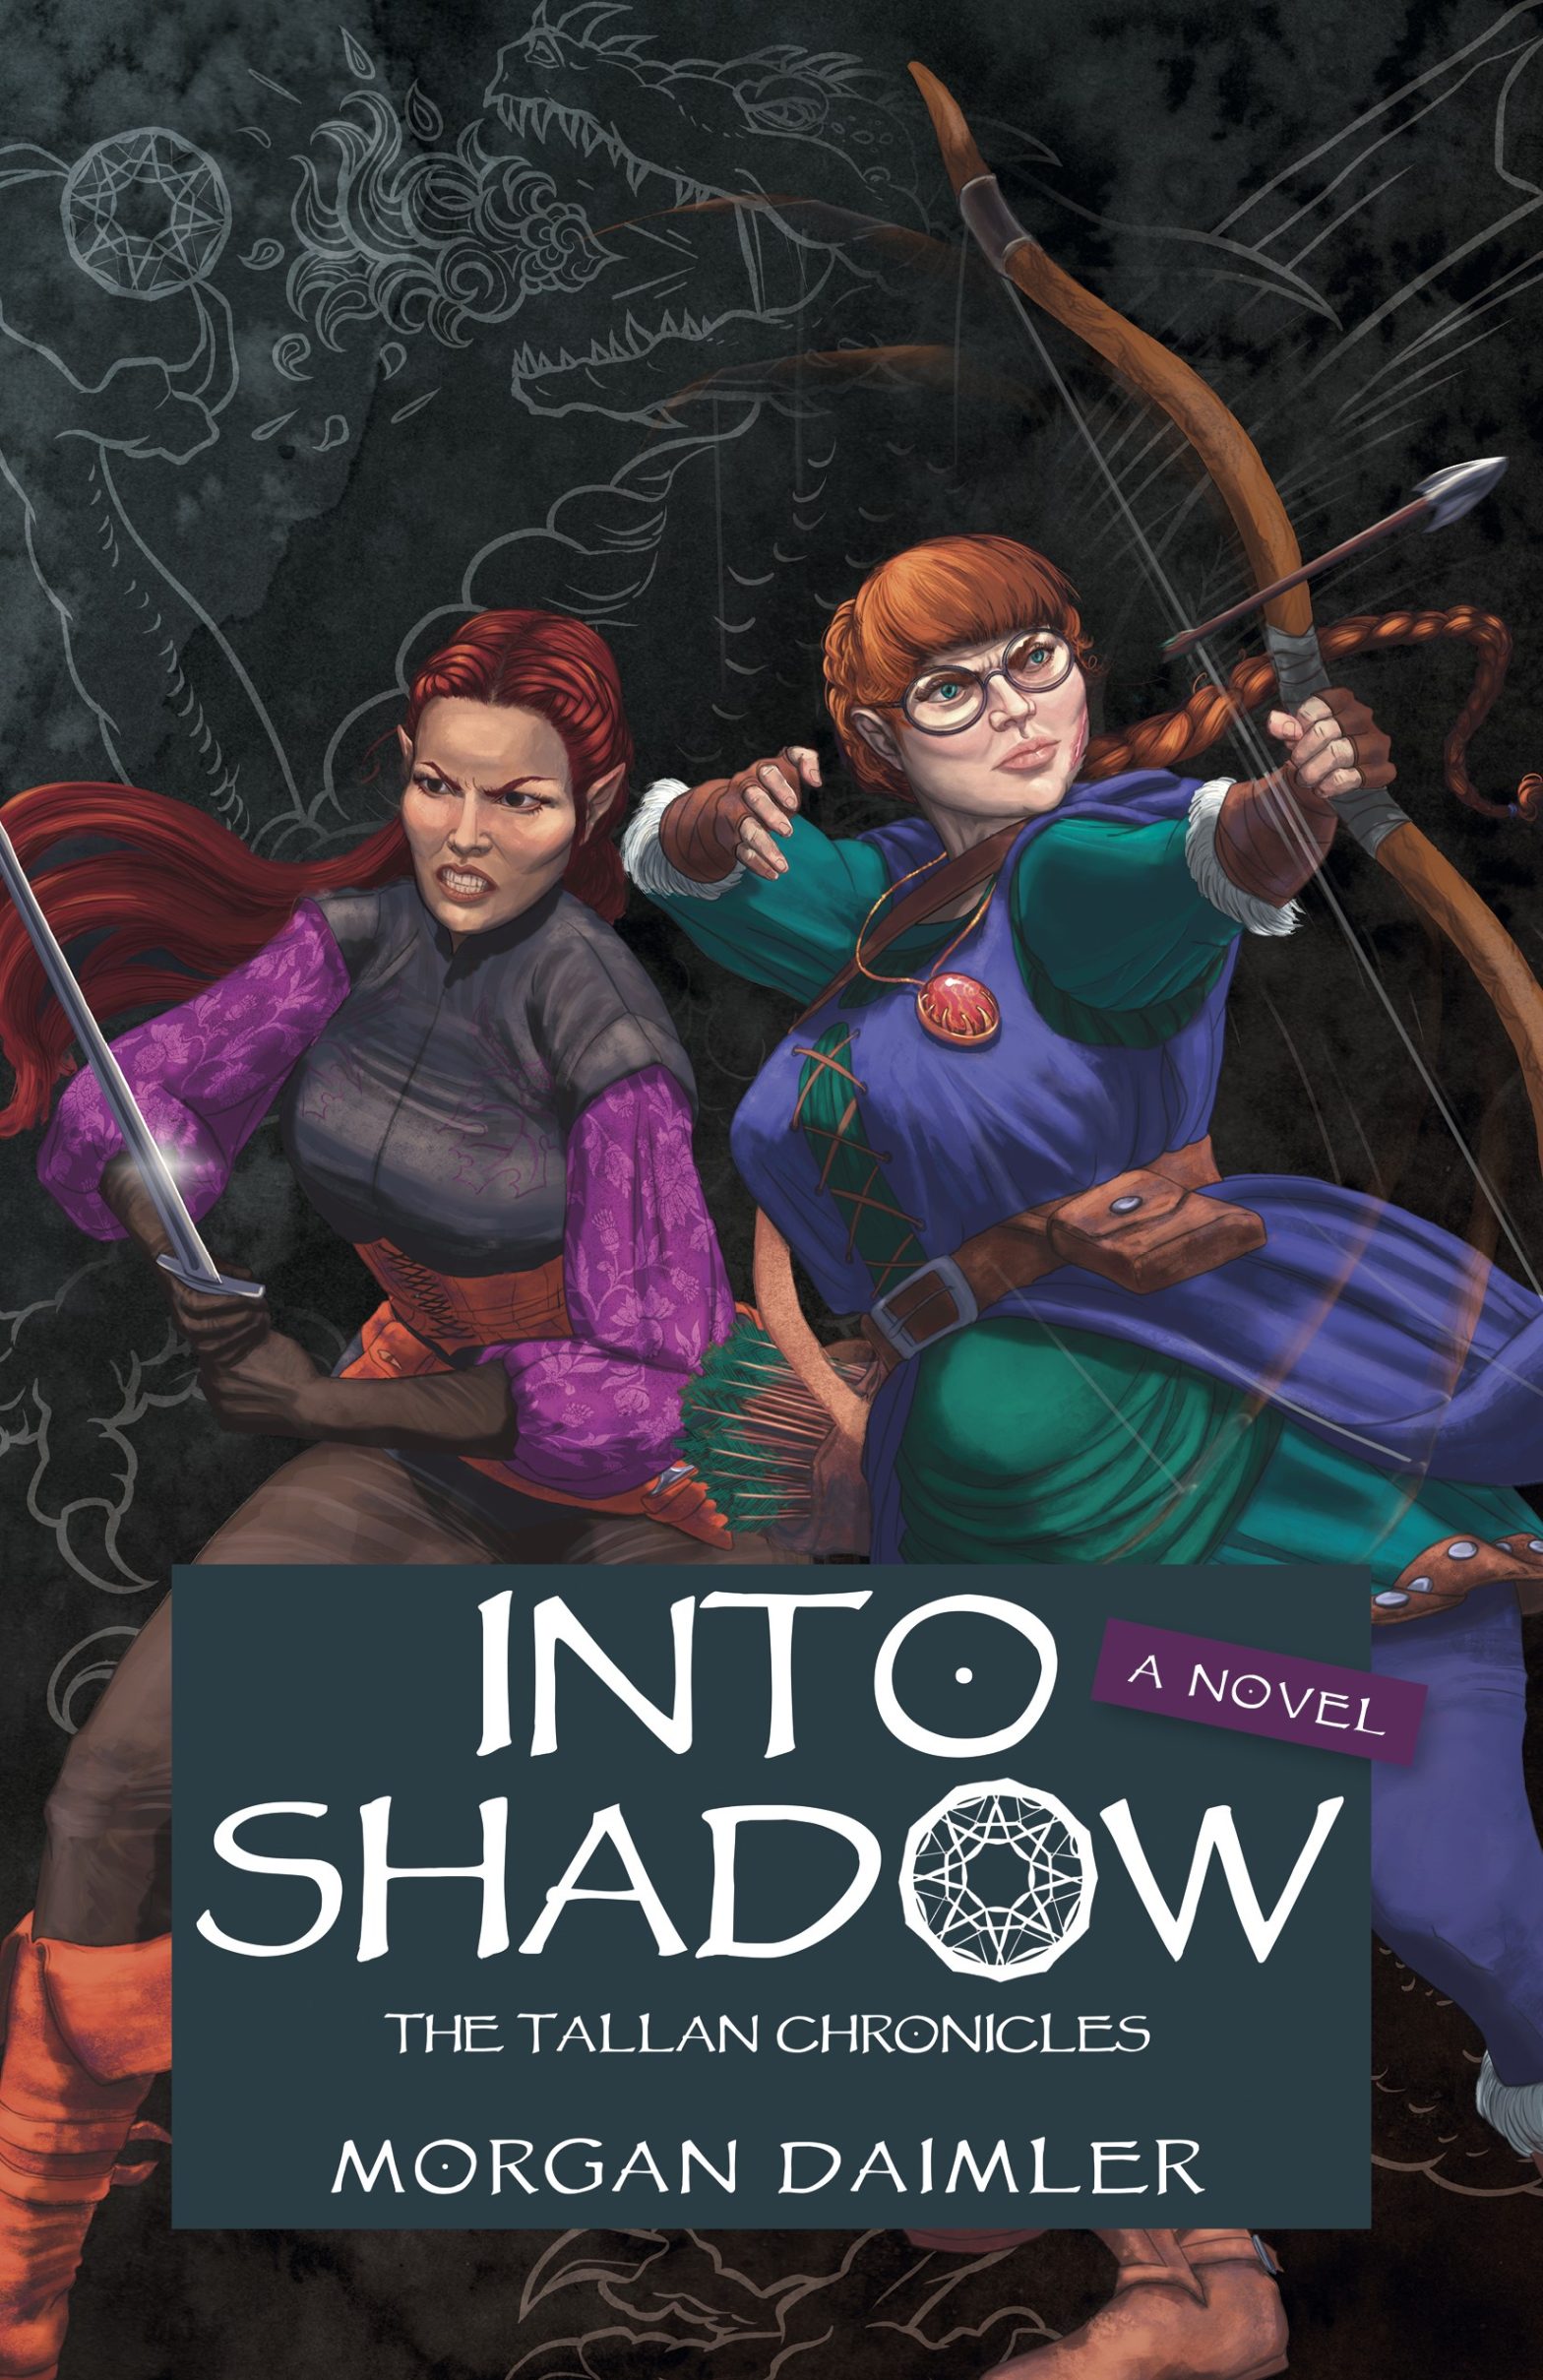 What We’re Enjoying – Into Shadow